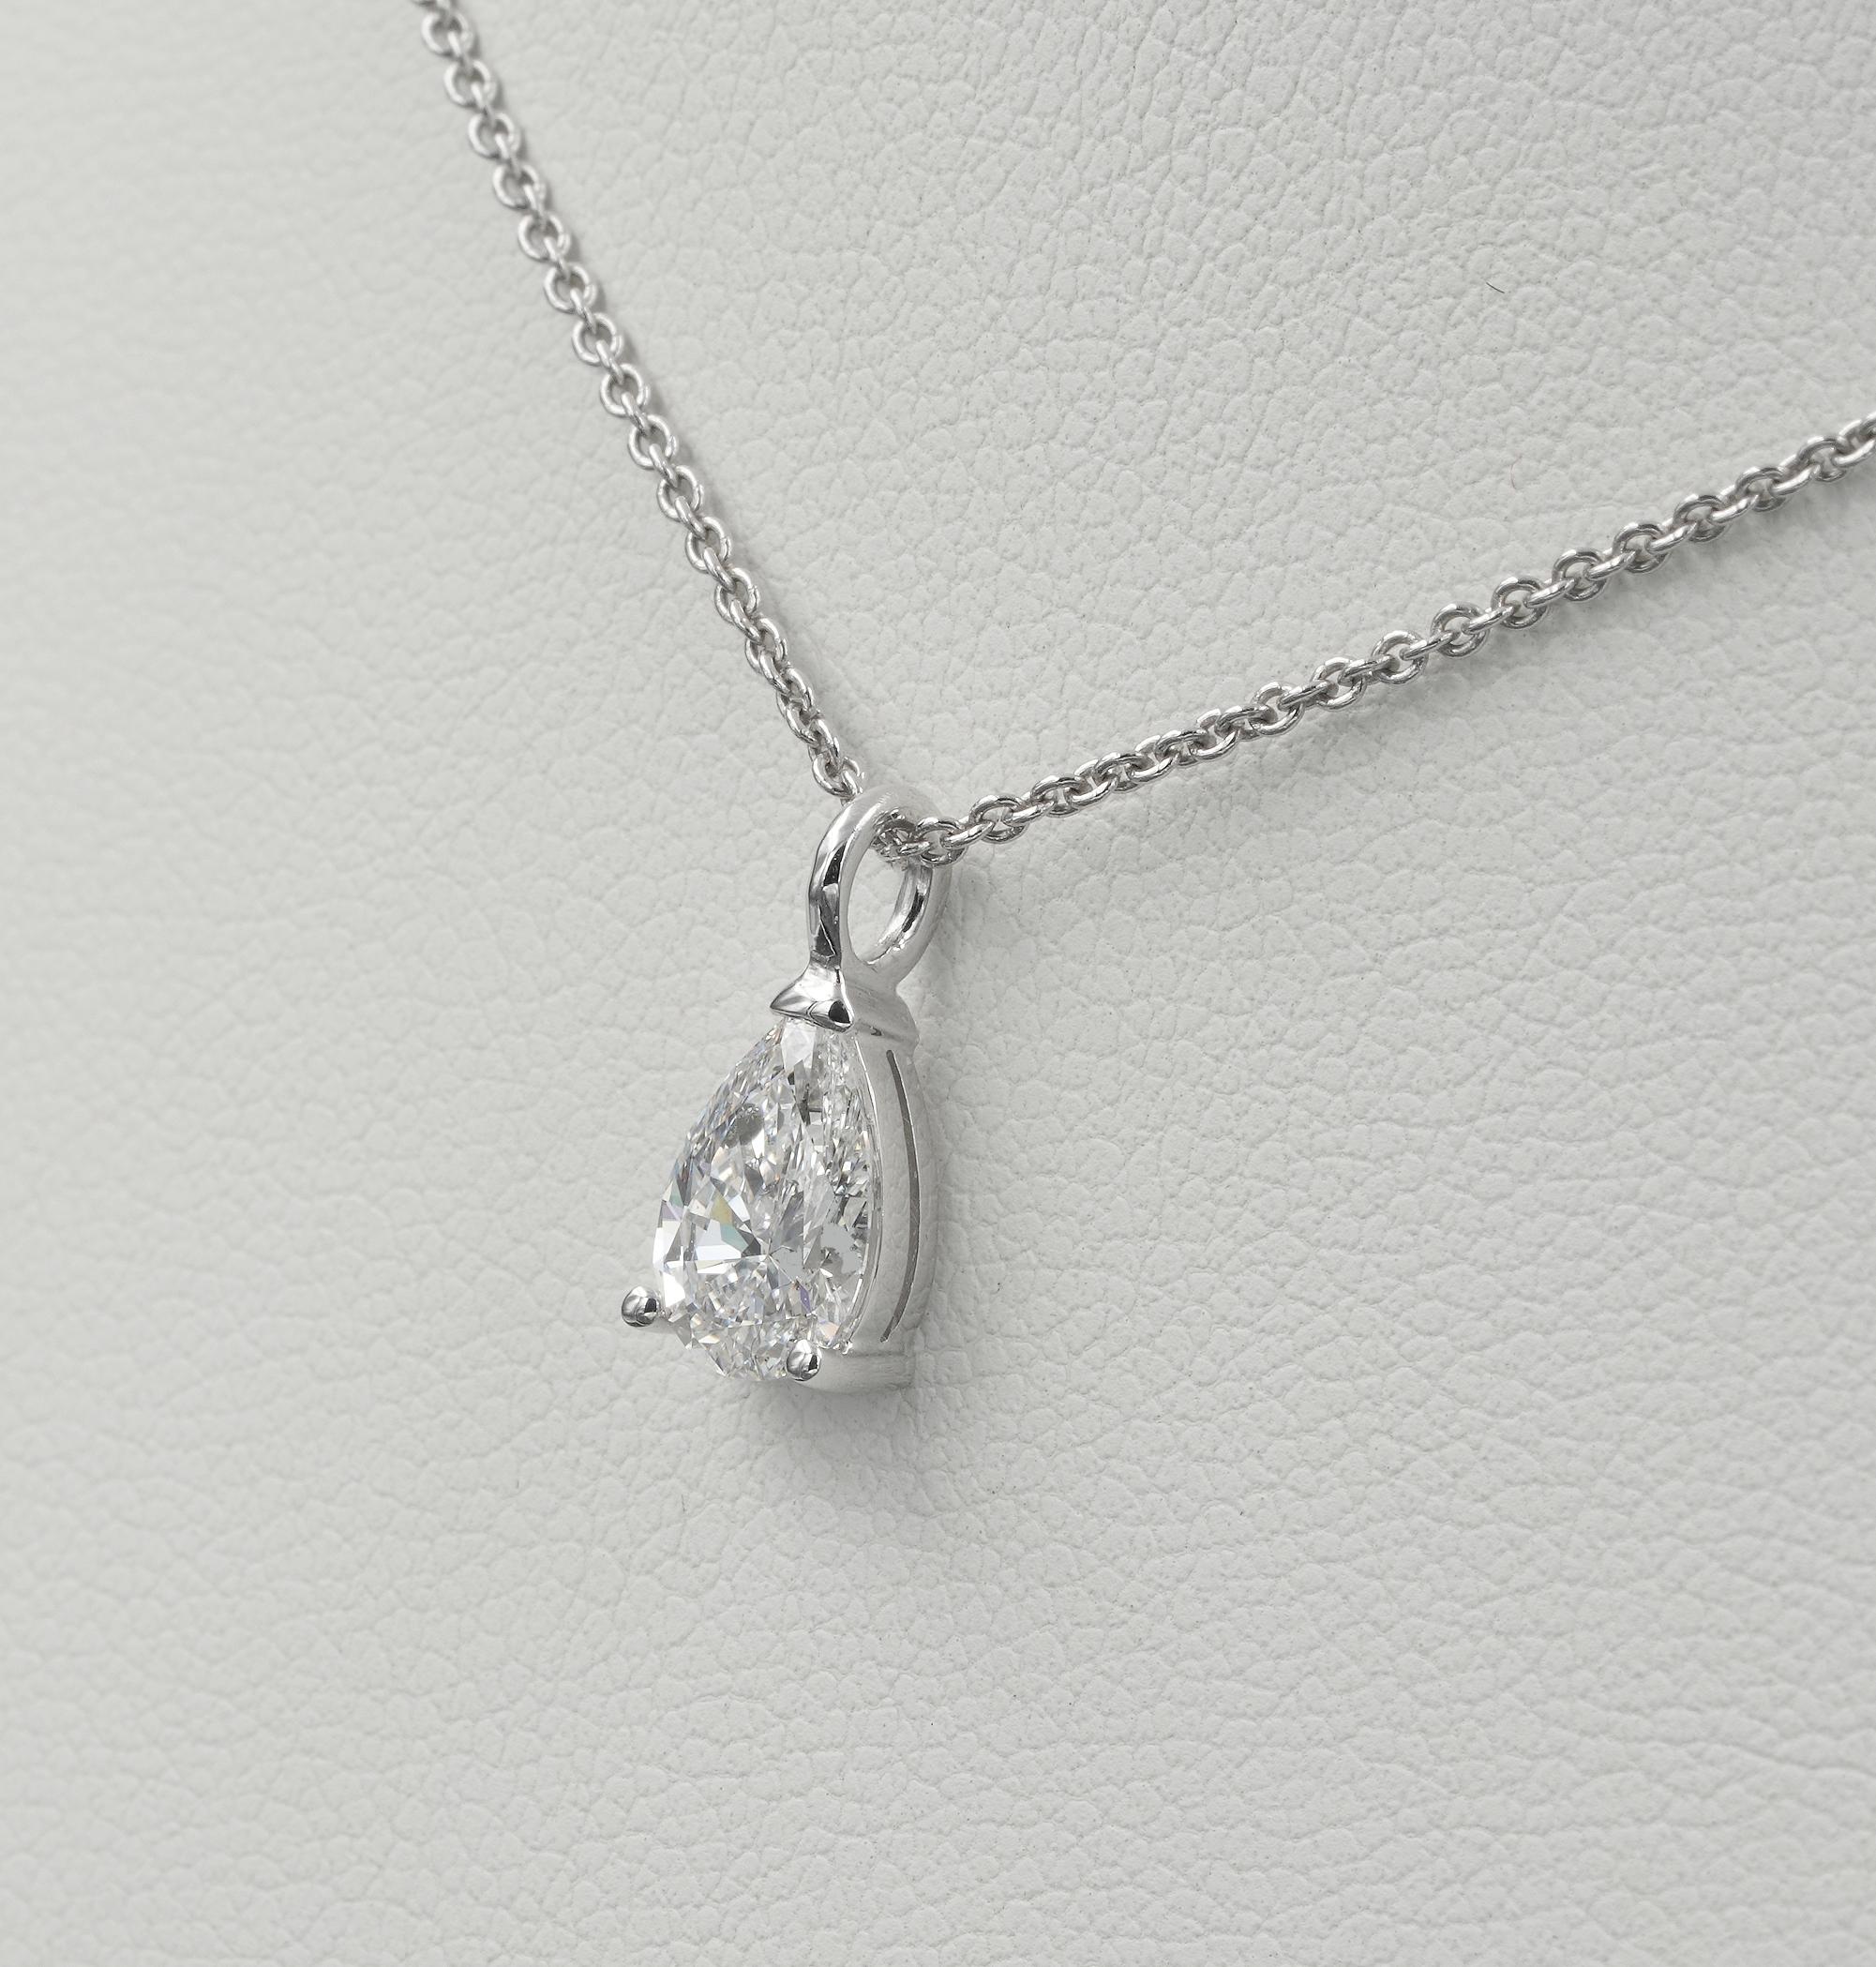 Contemporary Classy .75 Ct Weighted Tear Drop Diamond Plus 18 KT Chain Necklace For Sale